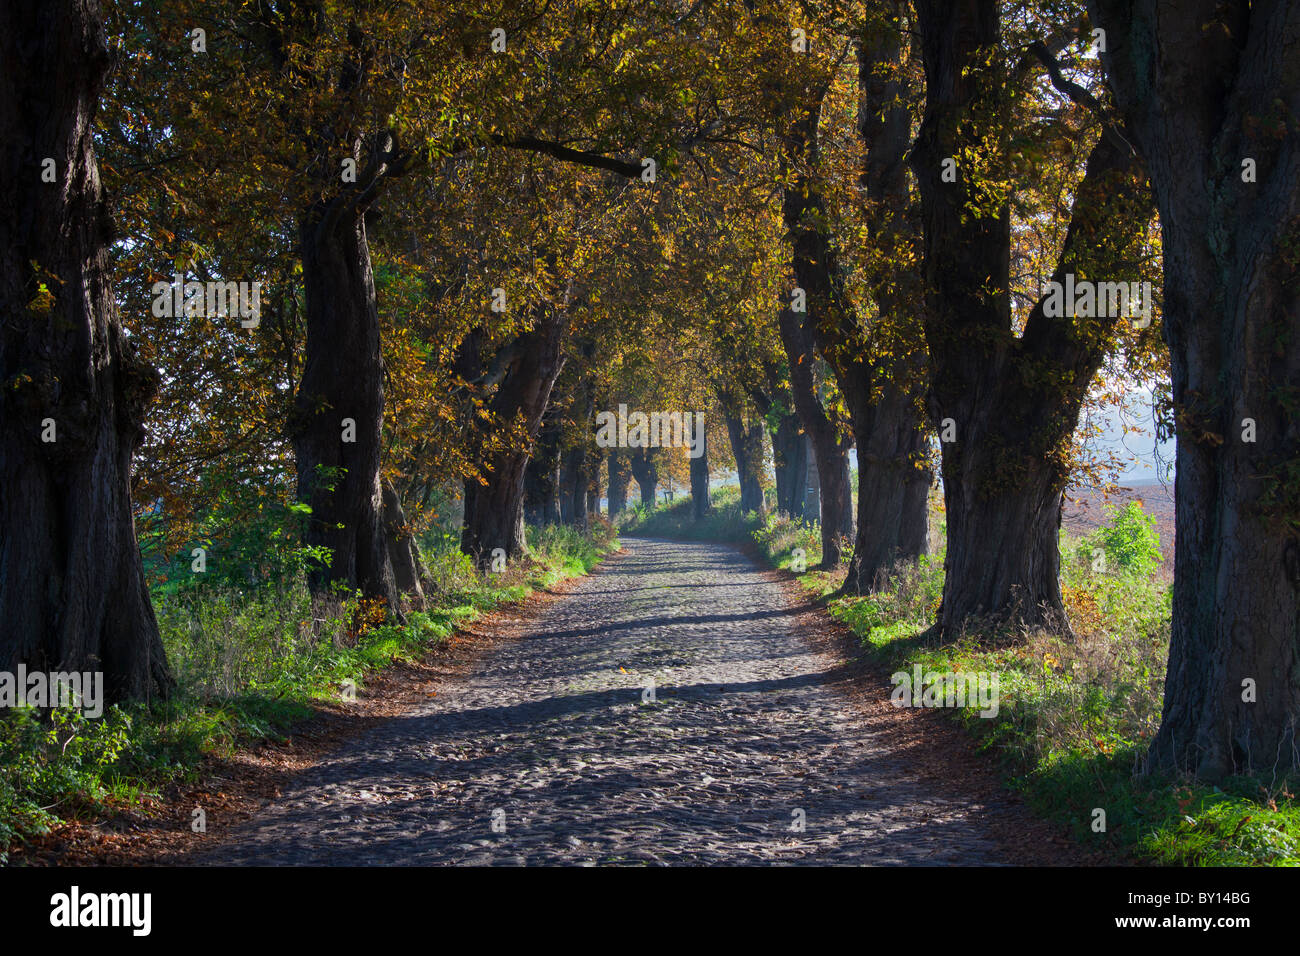 Cobbled street lined with horse chestnut (Aesculus hippocastanum) trees in autumn, Germany Stock Photo